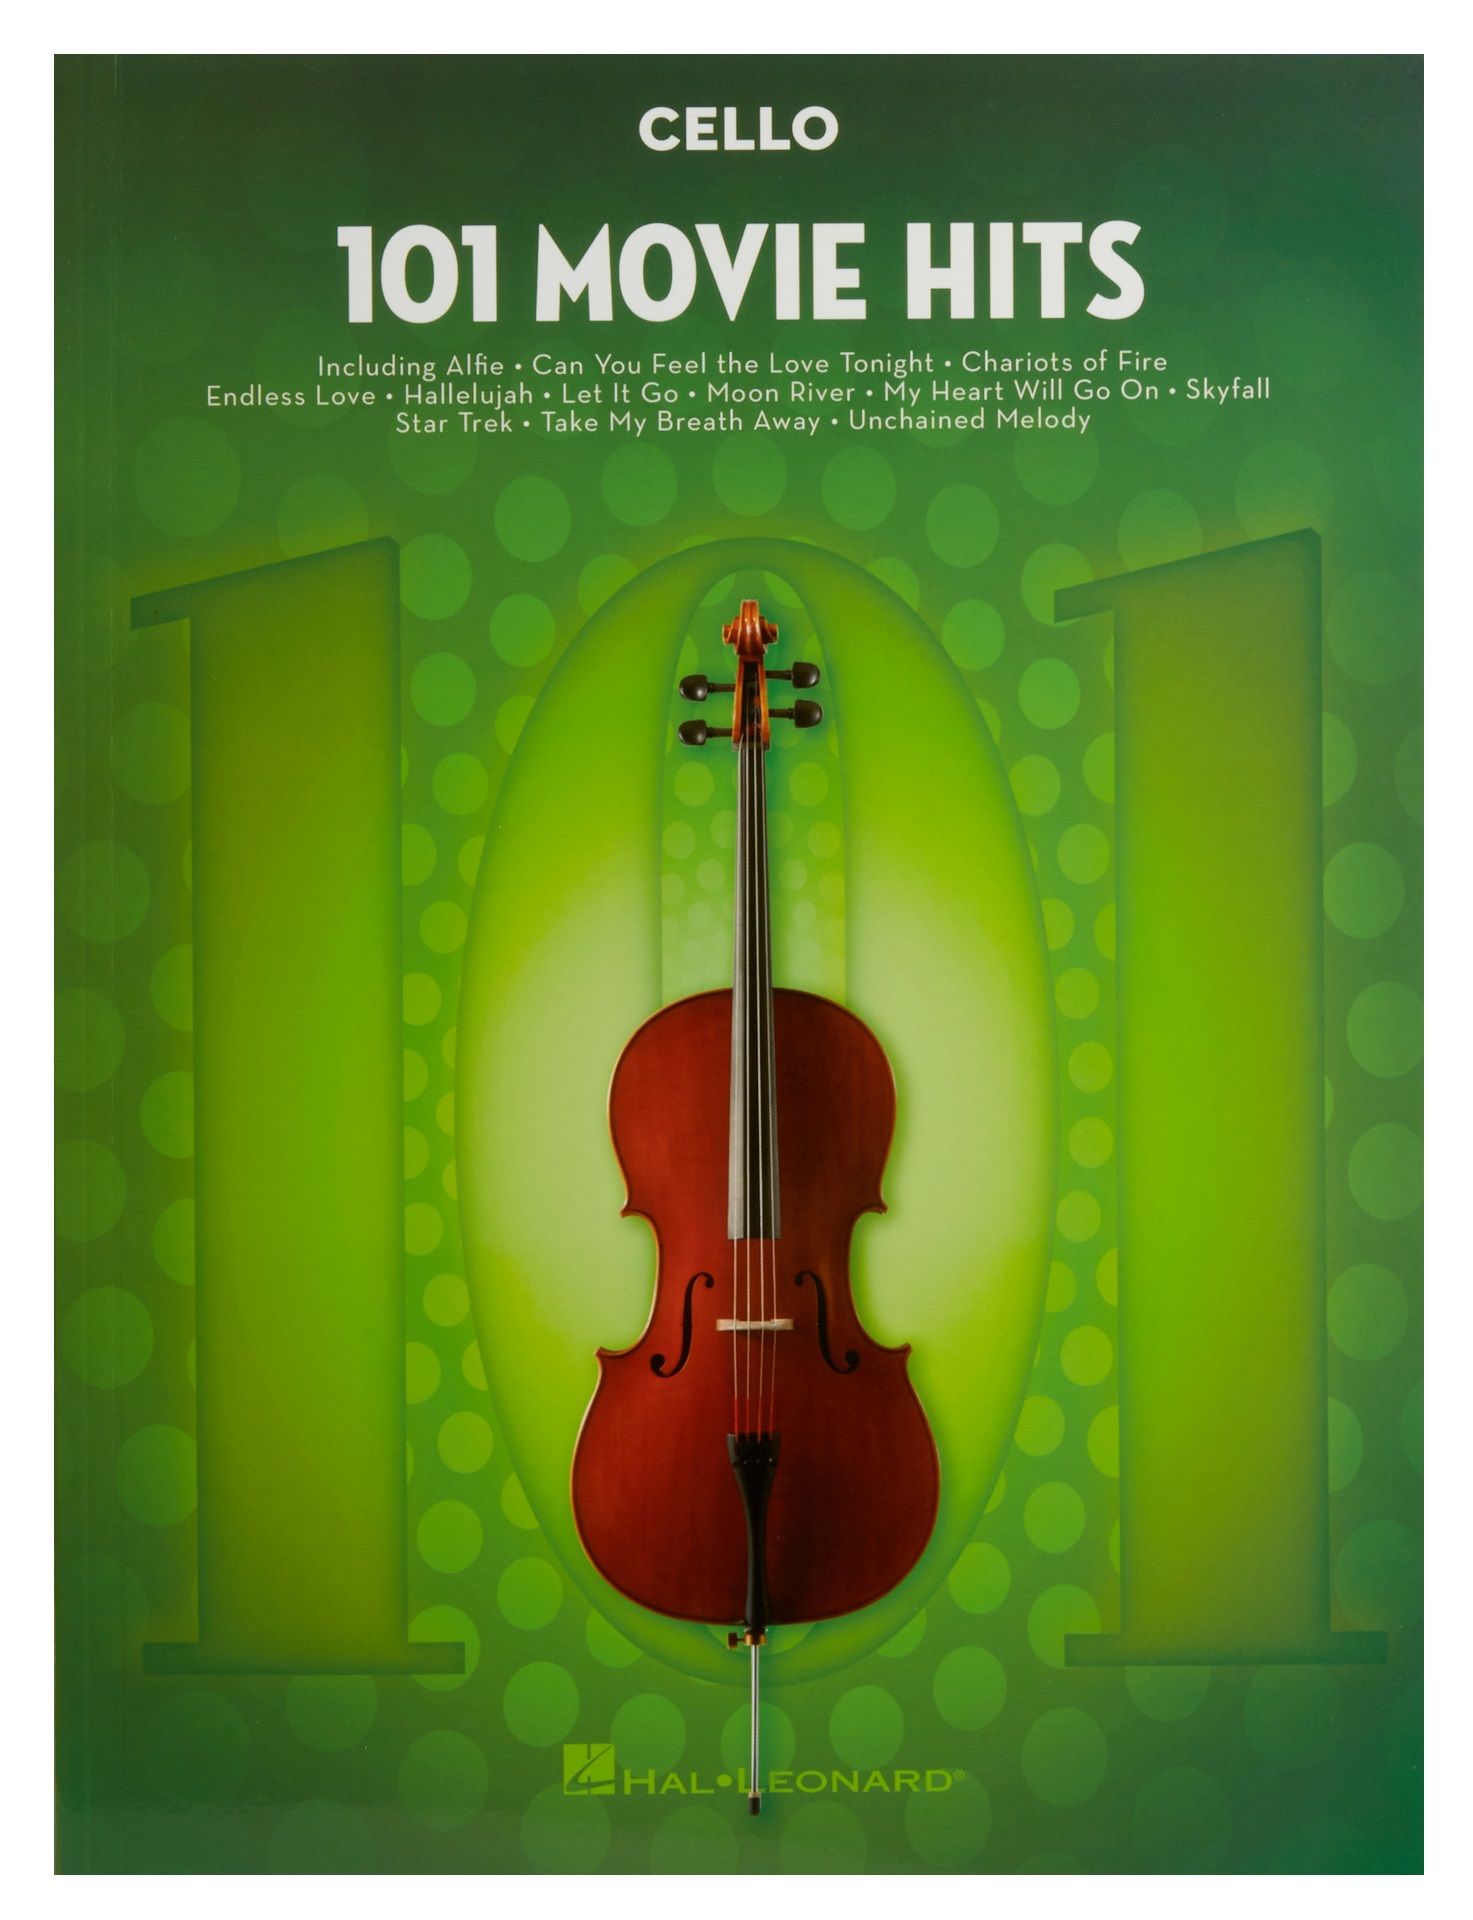 MS 101 Movie Hits for Cello